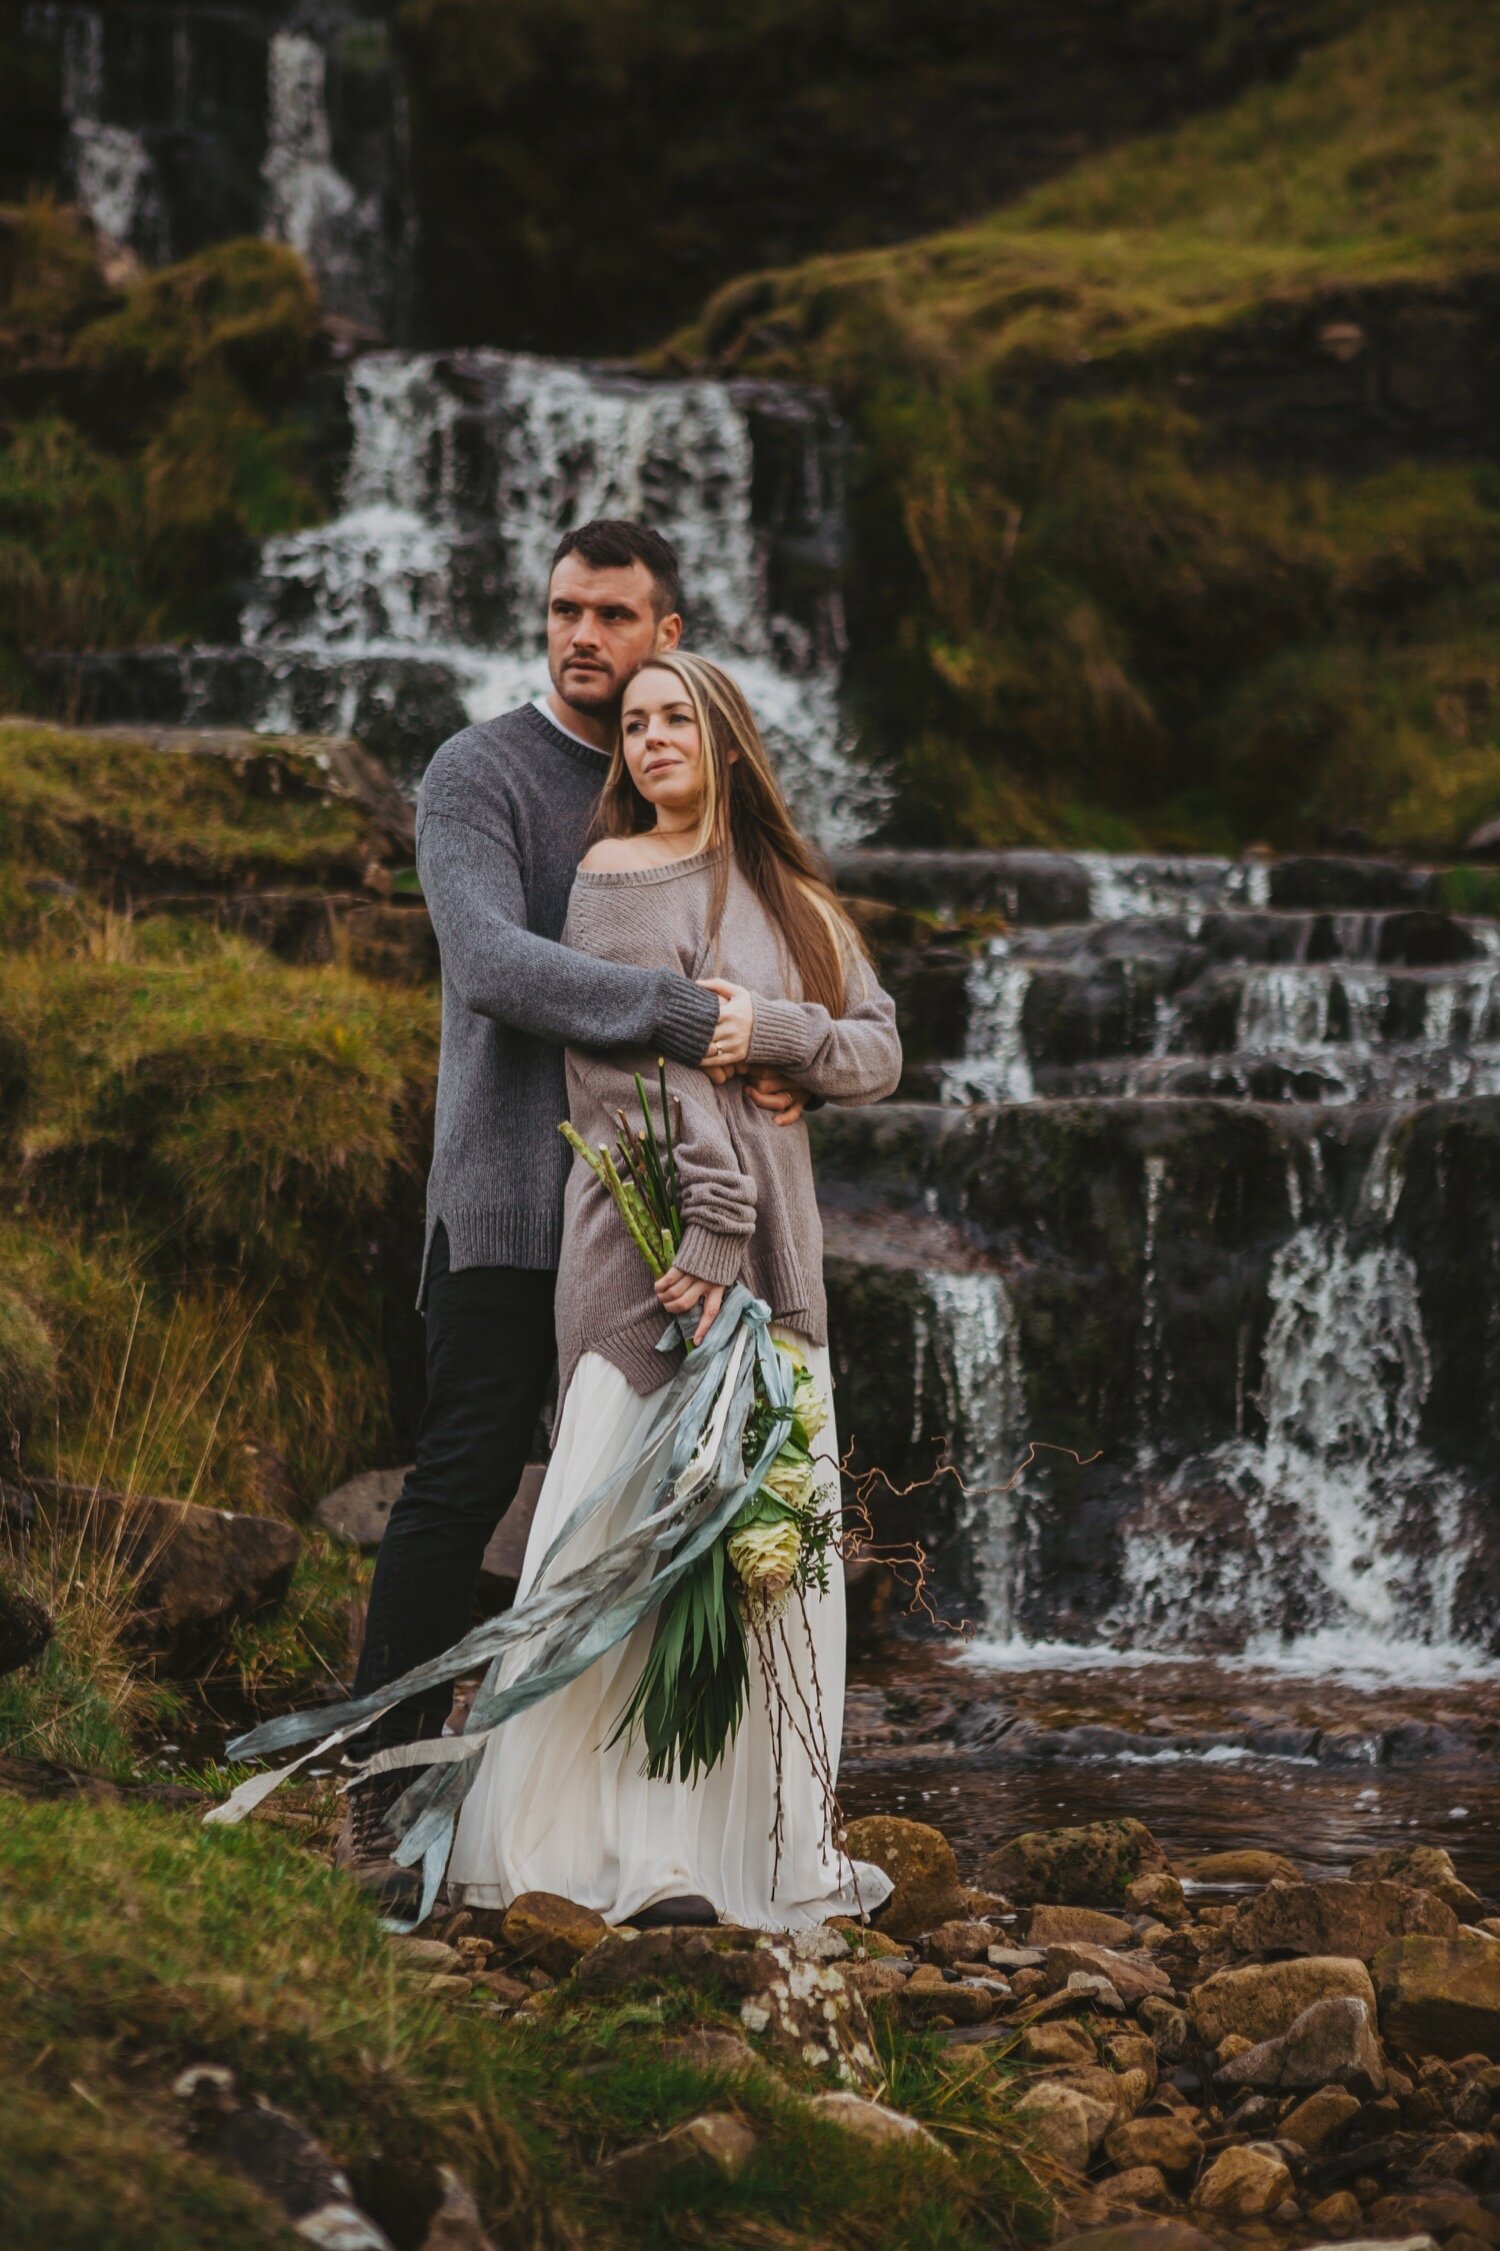 24_TWS-73__grey_dramatic_landscape_alternative_elope_alt_rock_blue_waterfall_winter_flowers_offbeat_dales_waterfalls_autumn_elopement_photography_ribbons_moody_bride_silver_wedding_yorkshire_rainy_cloudy_cosy_weather_photographer_florals_groom.jpg